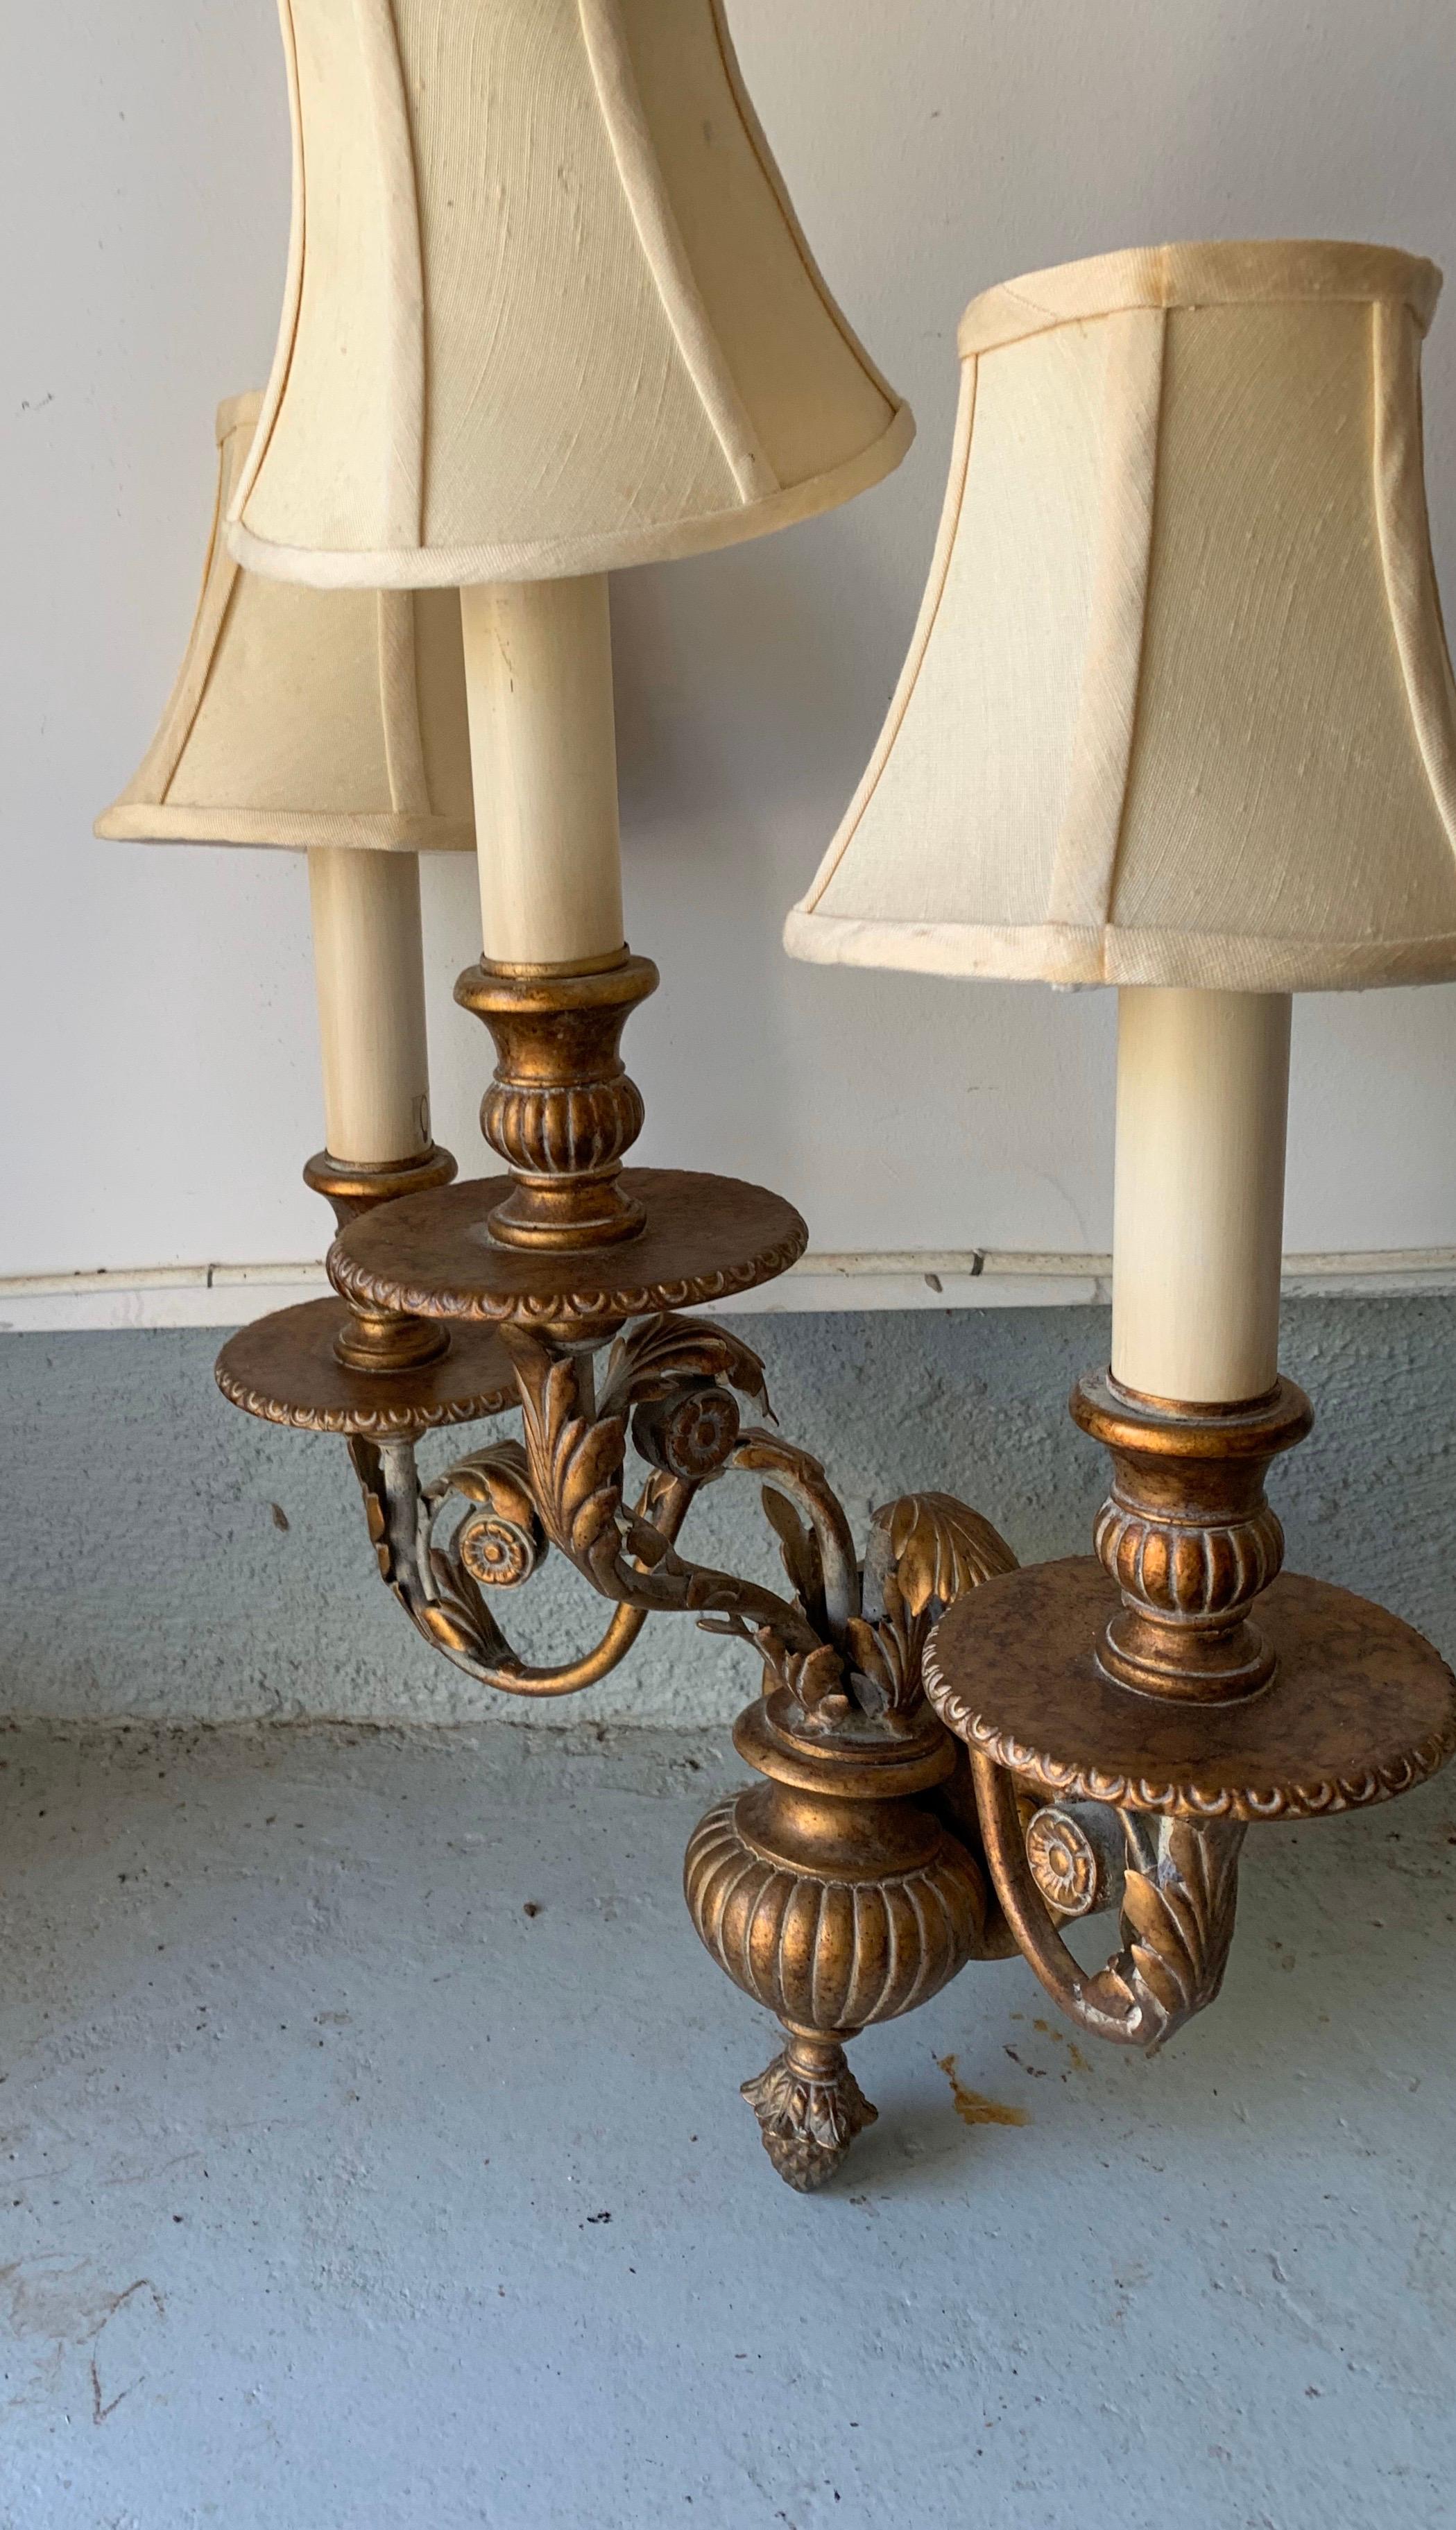 A pair of three-arm brass sconces made by the Fine Art Lamps company in Miami Lakes, FL, circa 1990.

UL listed.

Includes silk shades.

Dimnesions:
Sconces, 24 inches H x 16 inches w x 9 inches D x 5 inches wall plate
Shades, 3.25 inches